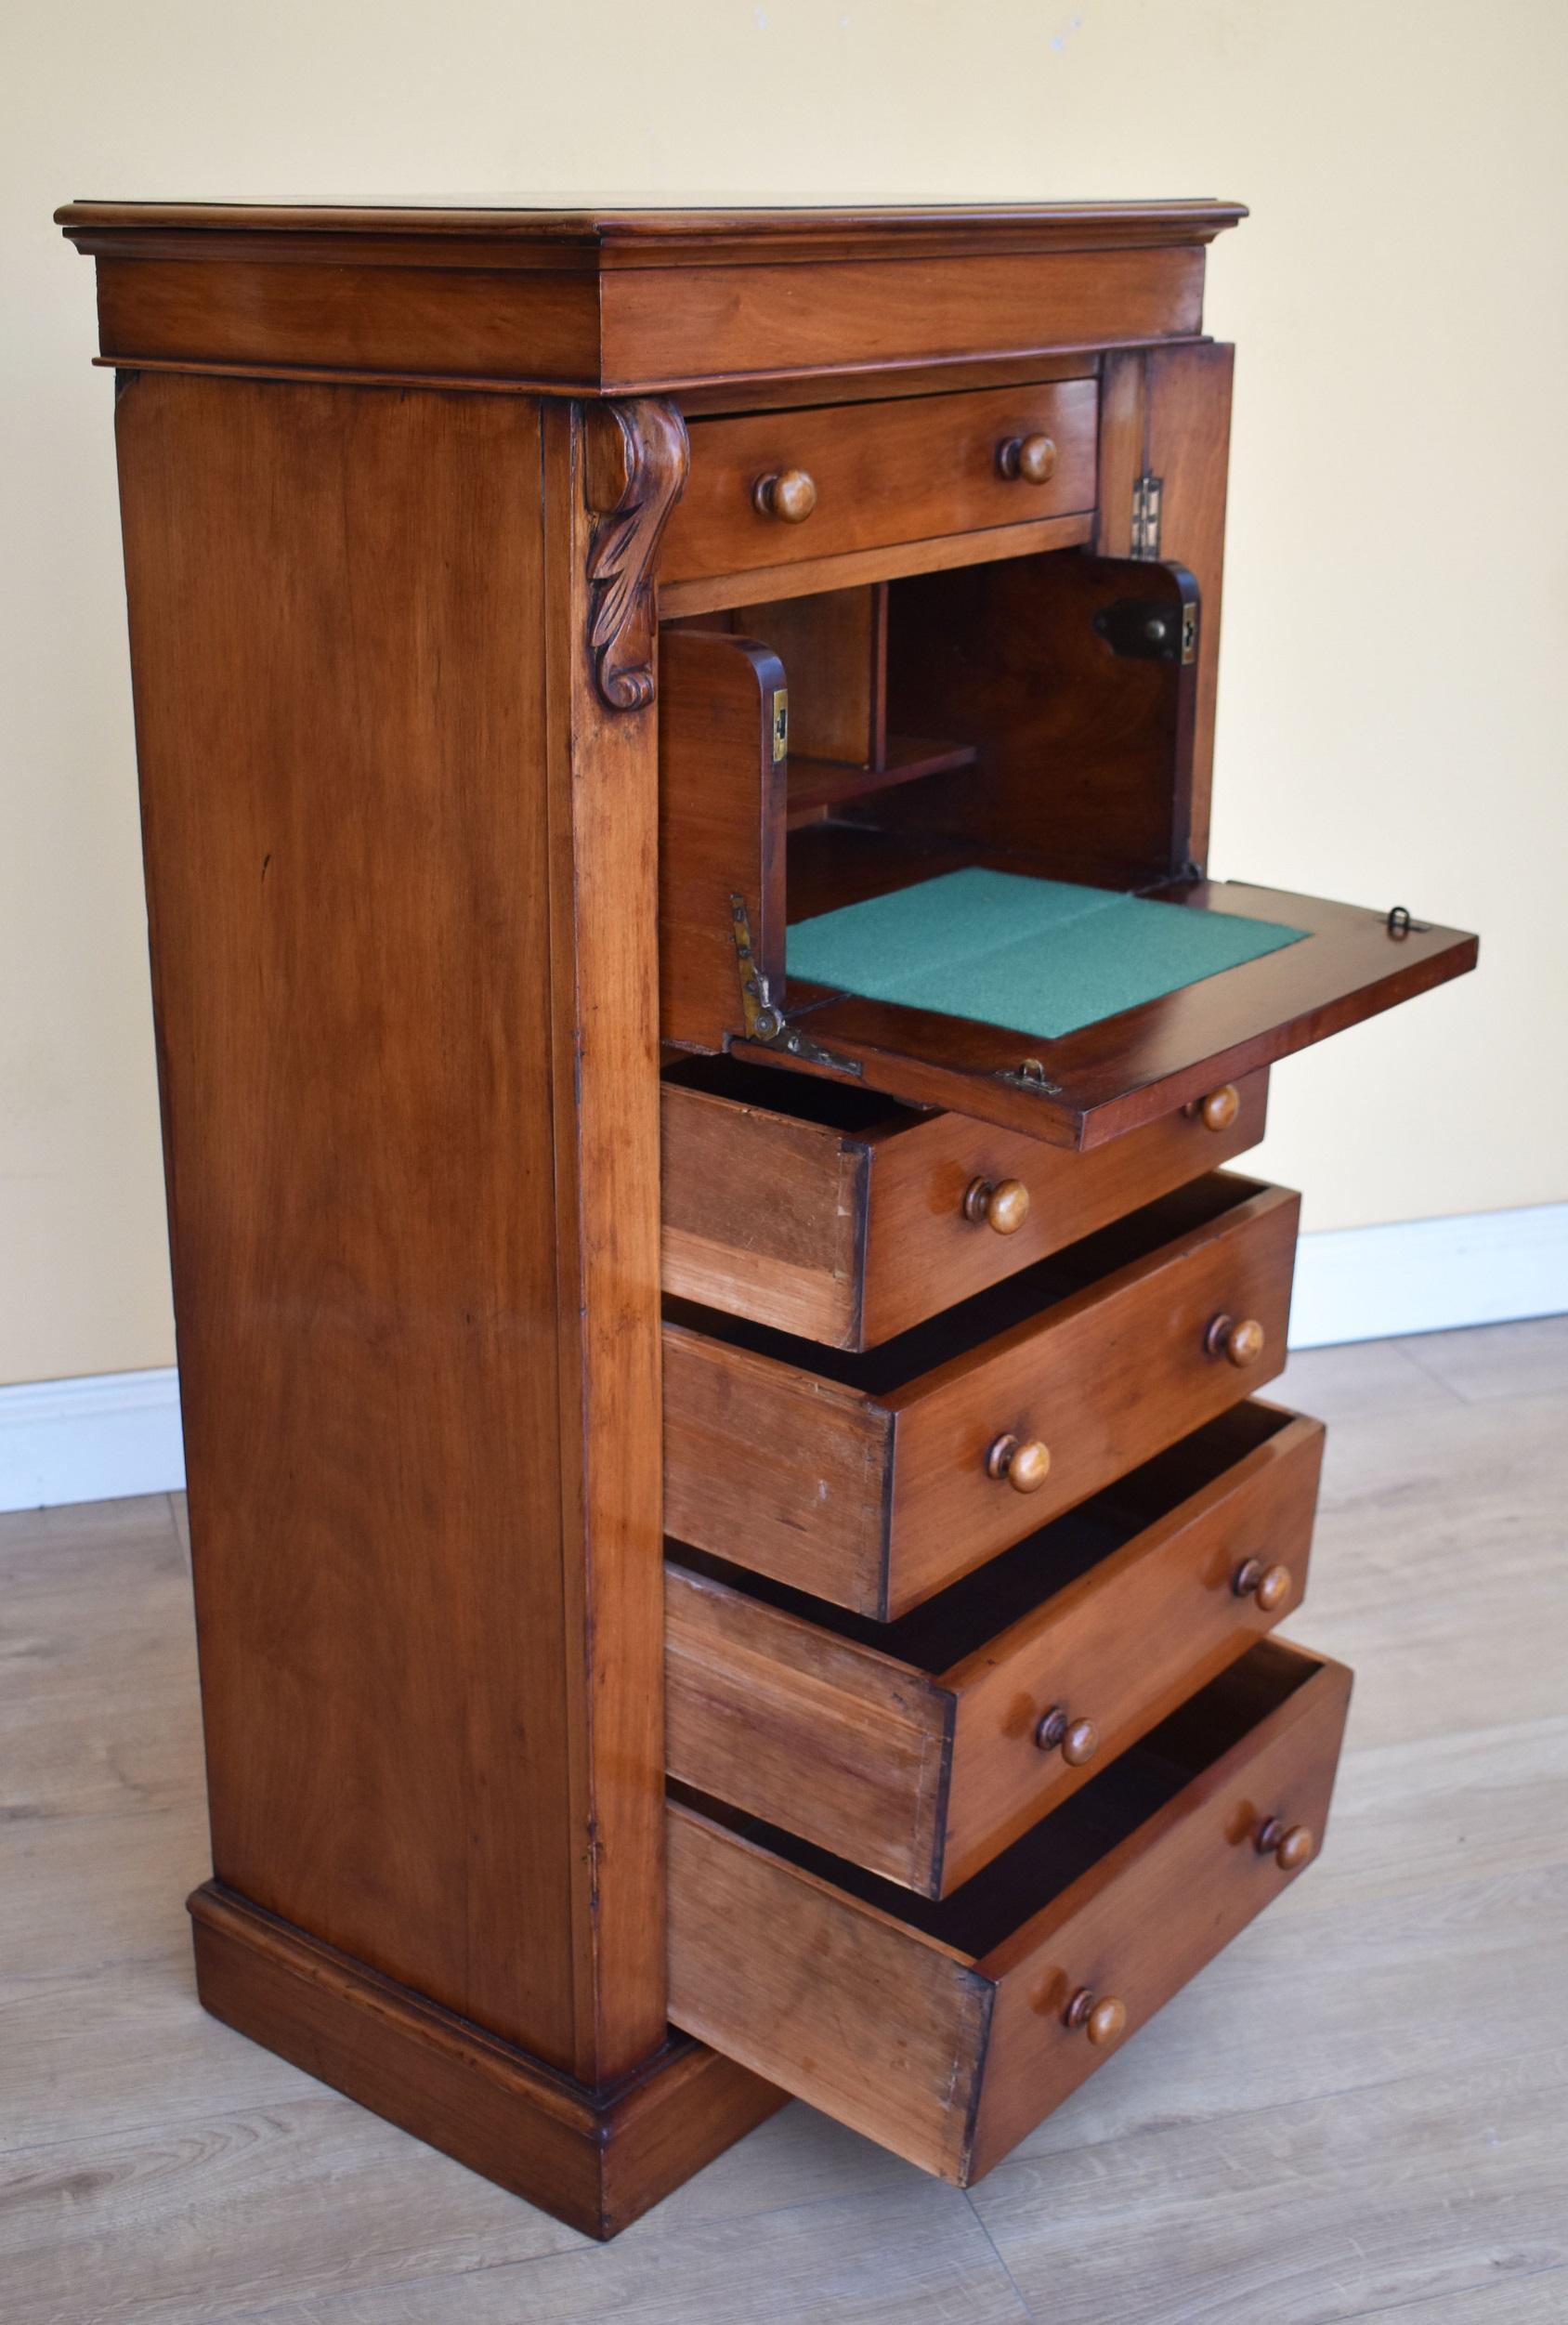 For sale is a good quality Victorian Mahogany Secretaire Wellington Chest. Appearing to have 7 graduated drawers, the 2nd and 3rd drawers from the top are hinged to reveal a fitted interior comprising pigeon holes and a green baise writing surface.